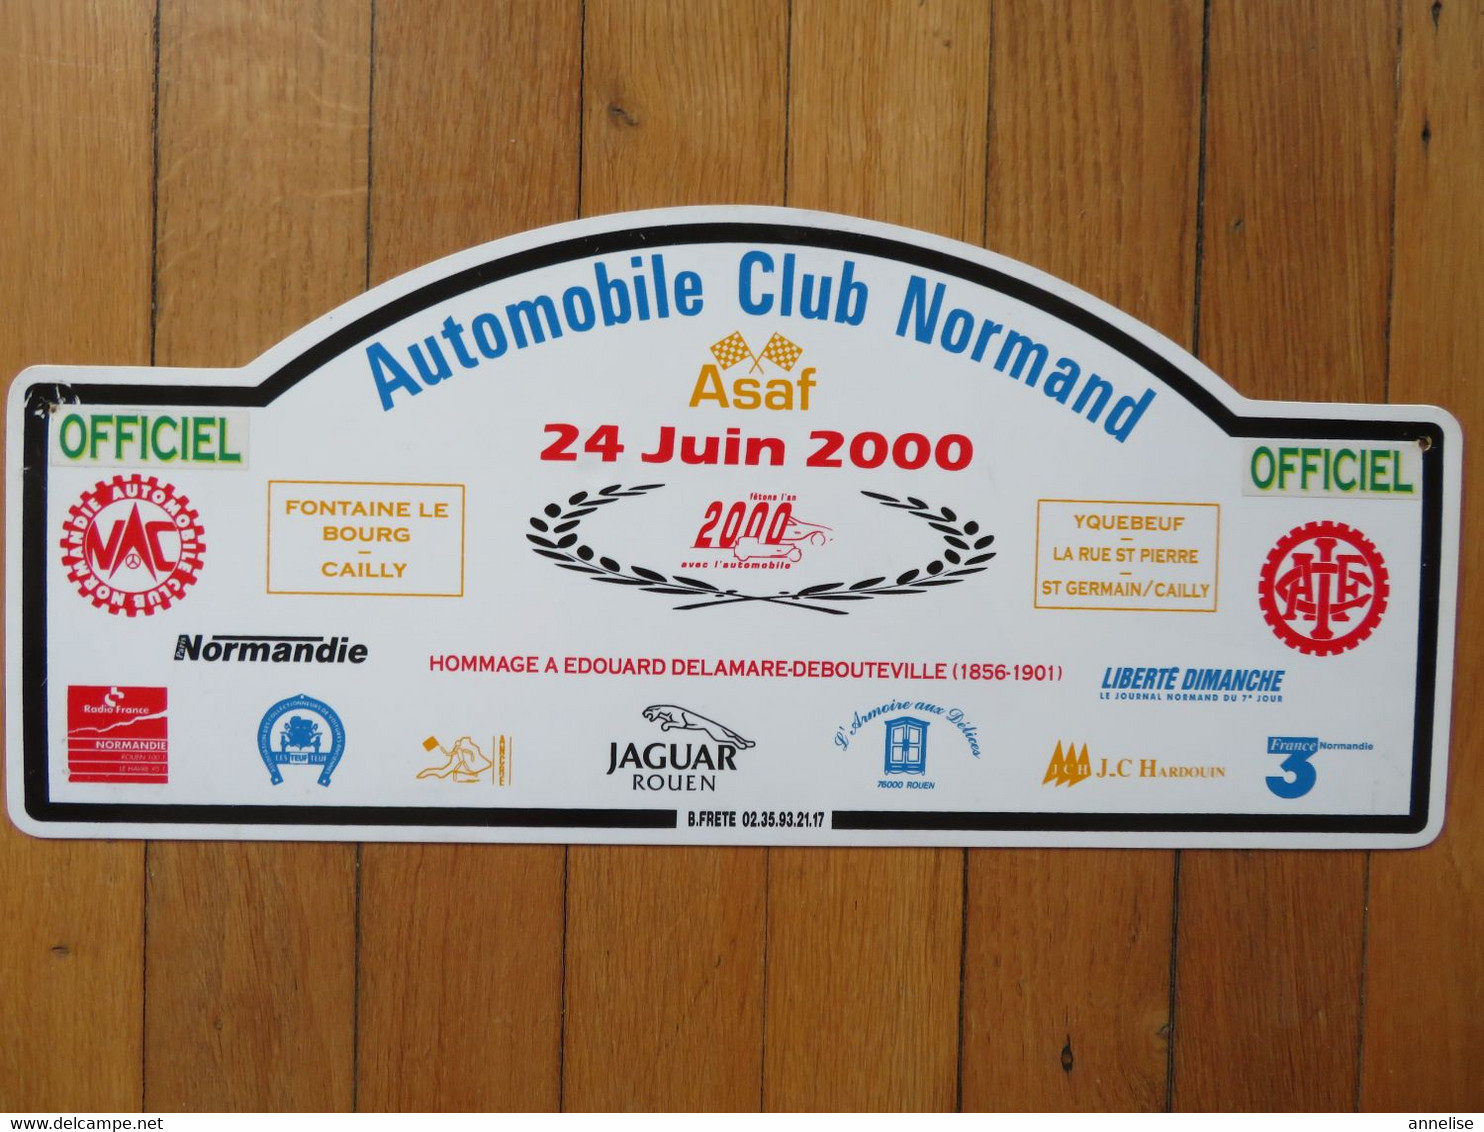 Plaque De Rallye Automobile 24 Juin 2000 "Officiel" Automobile Club Normand 76 Cailly Fontaine Bourg Yquebeuf St Germain - Rally-affiches